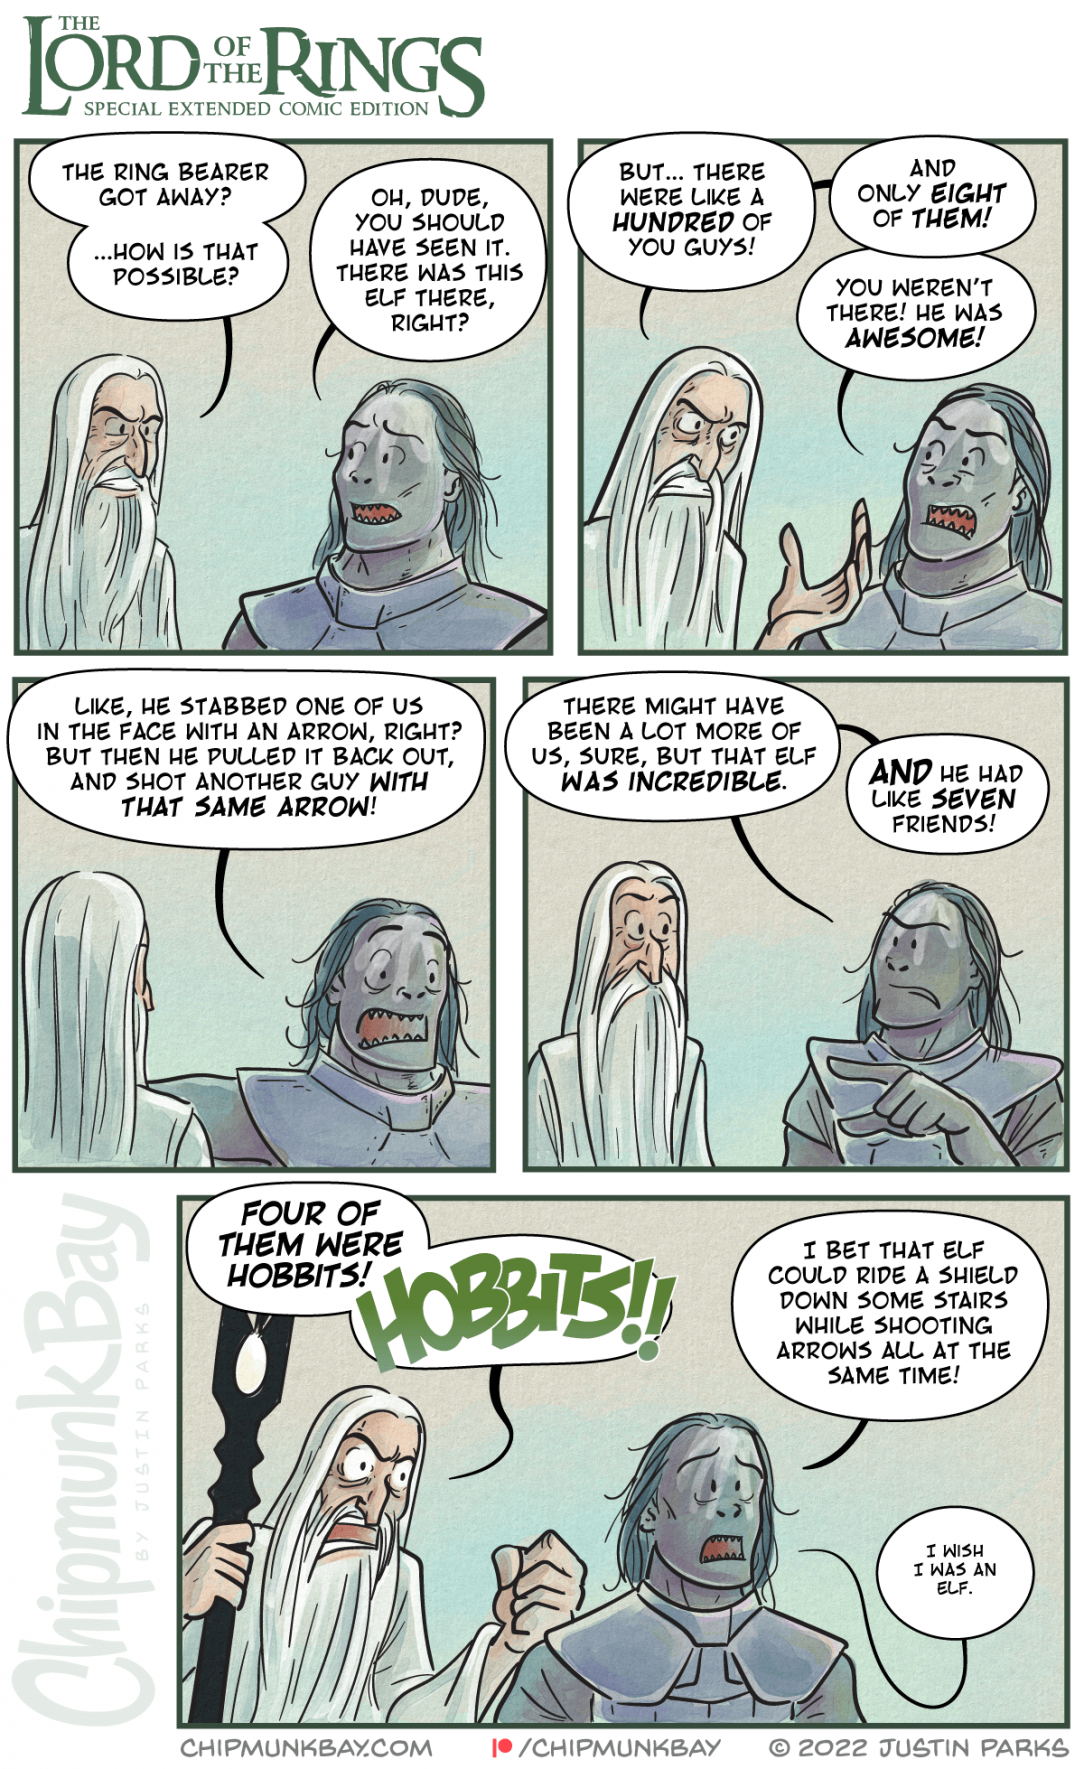 Lord of the Rings - Special Comic Edition